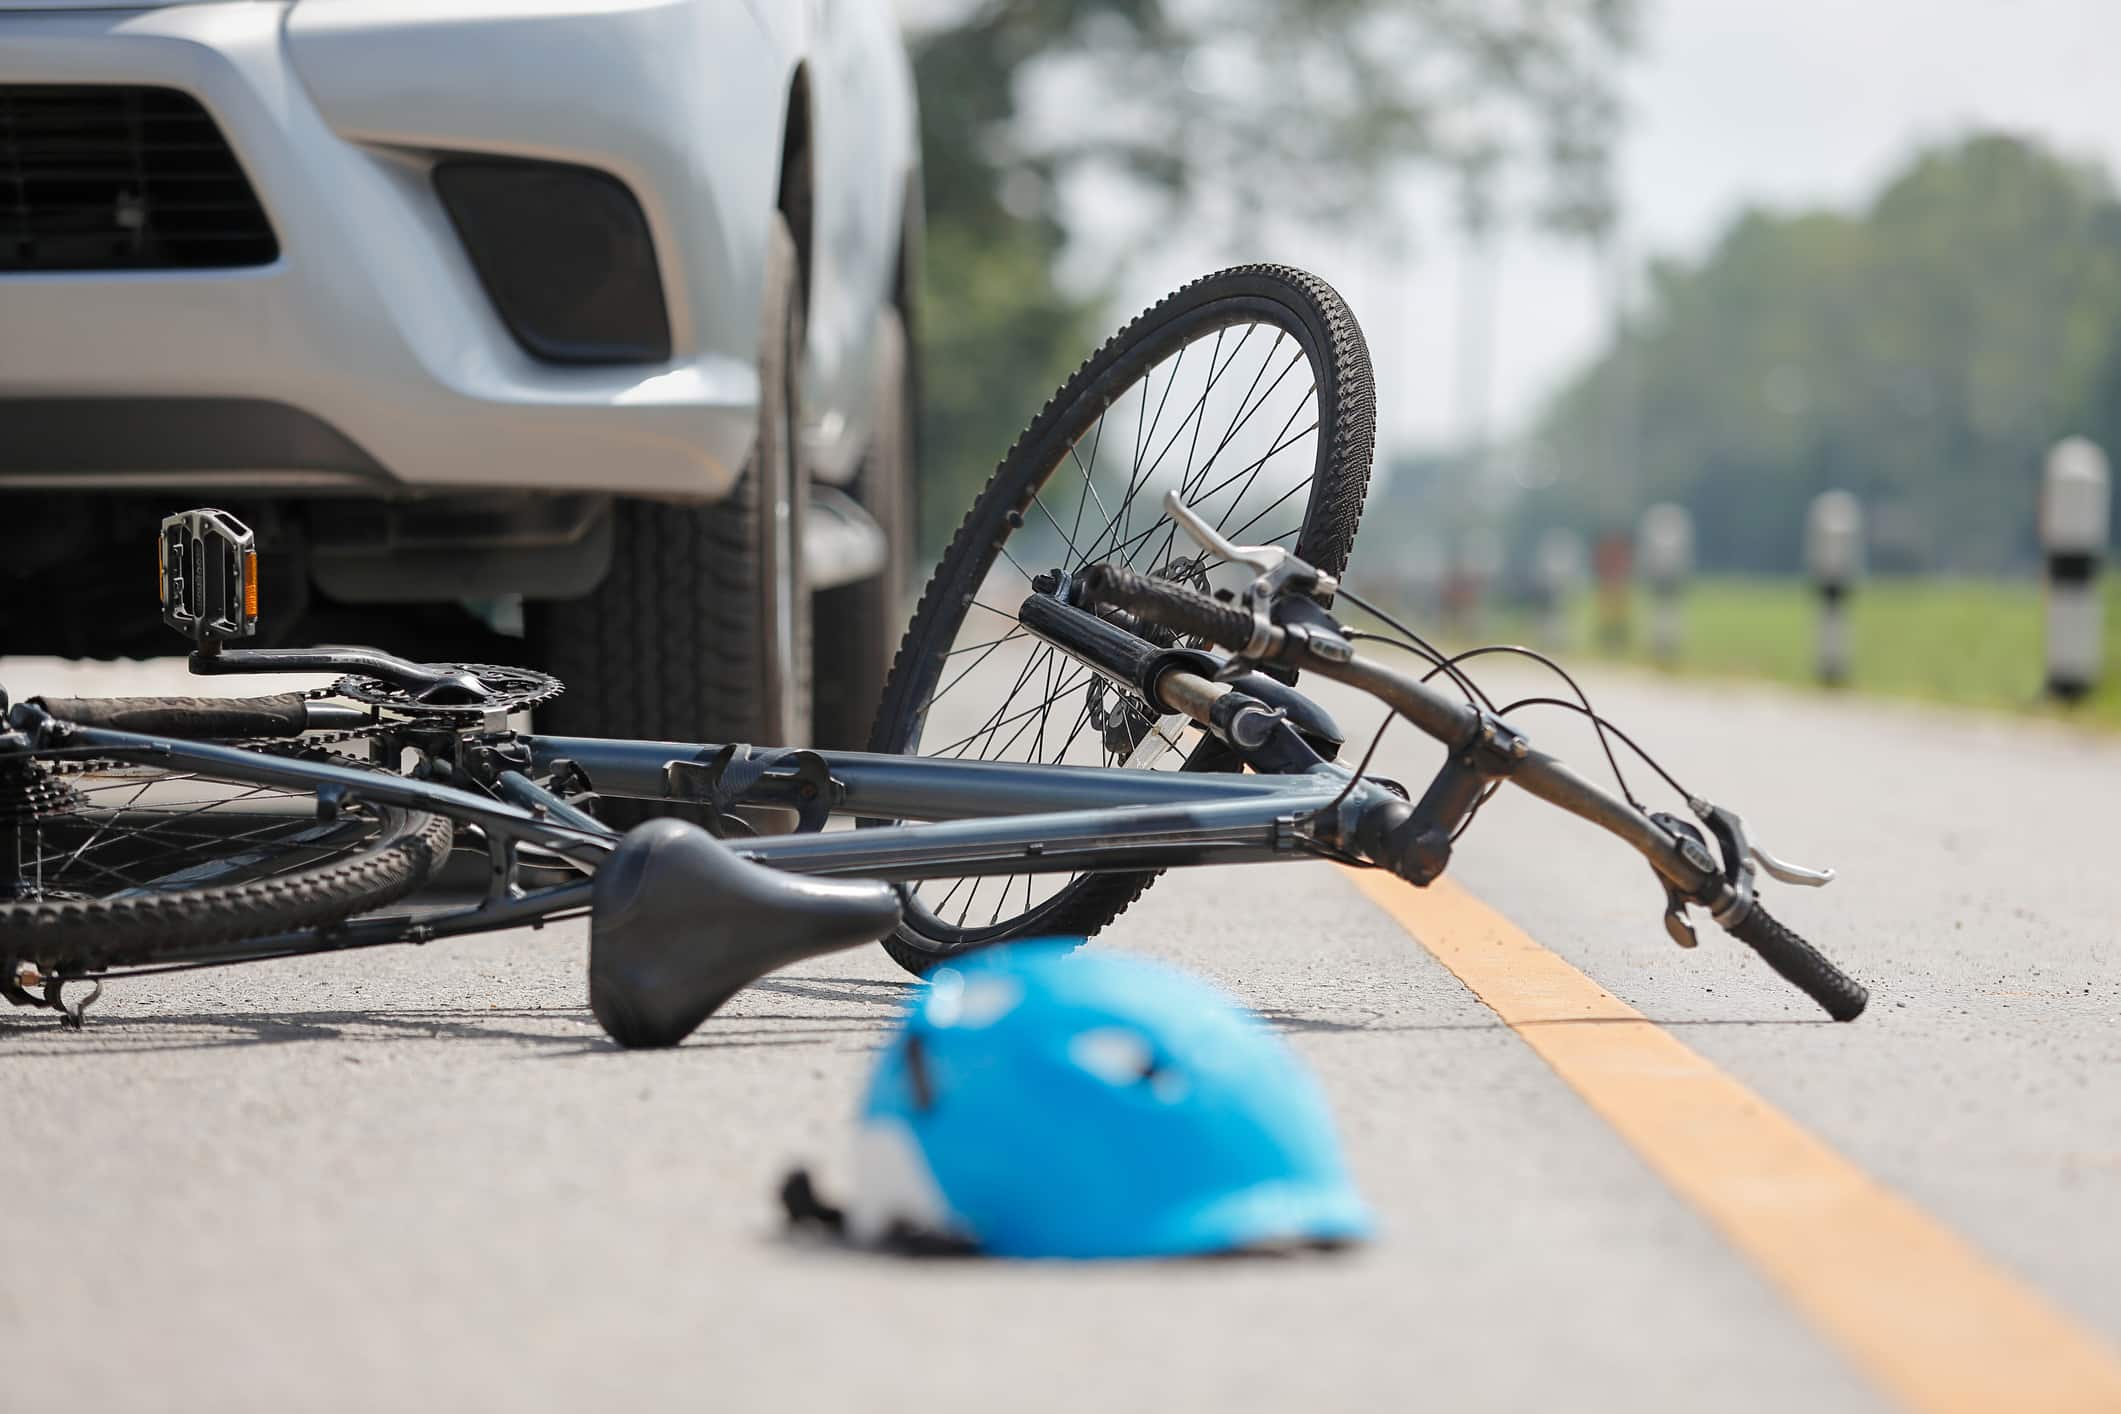 A bicycle lays in the road between a black sedan and ambulance after a bicycle accident in Lodi, NJ.